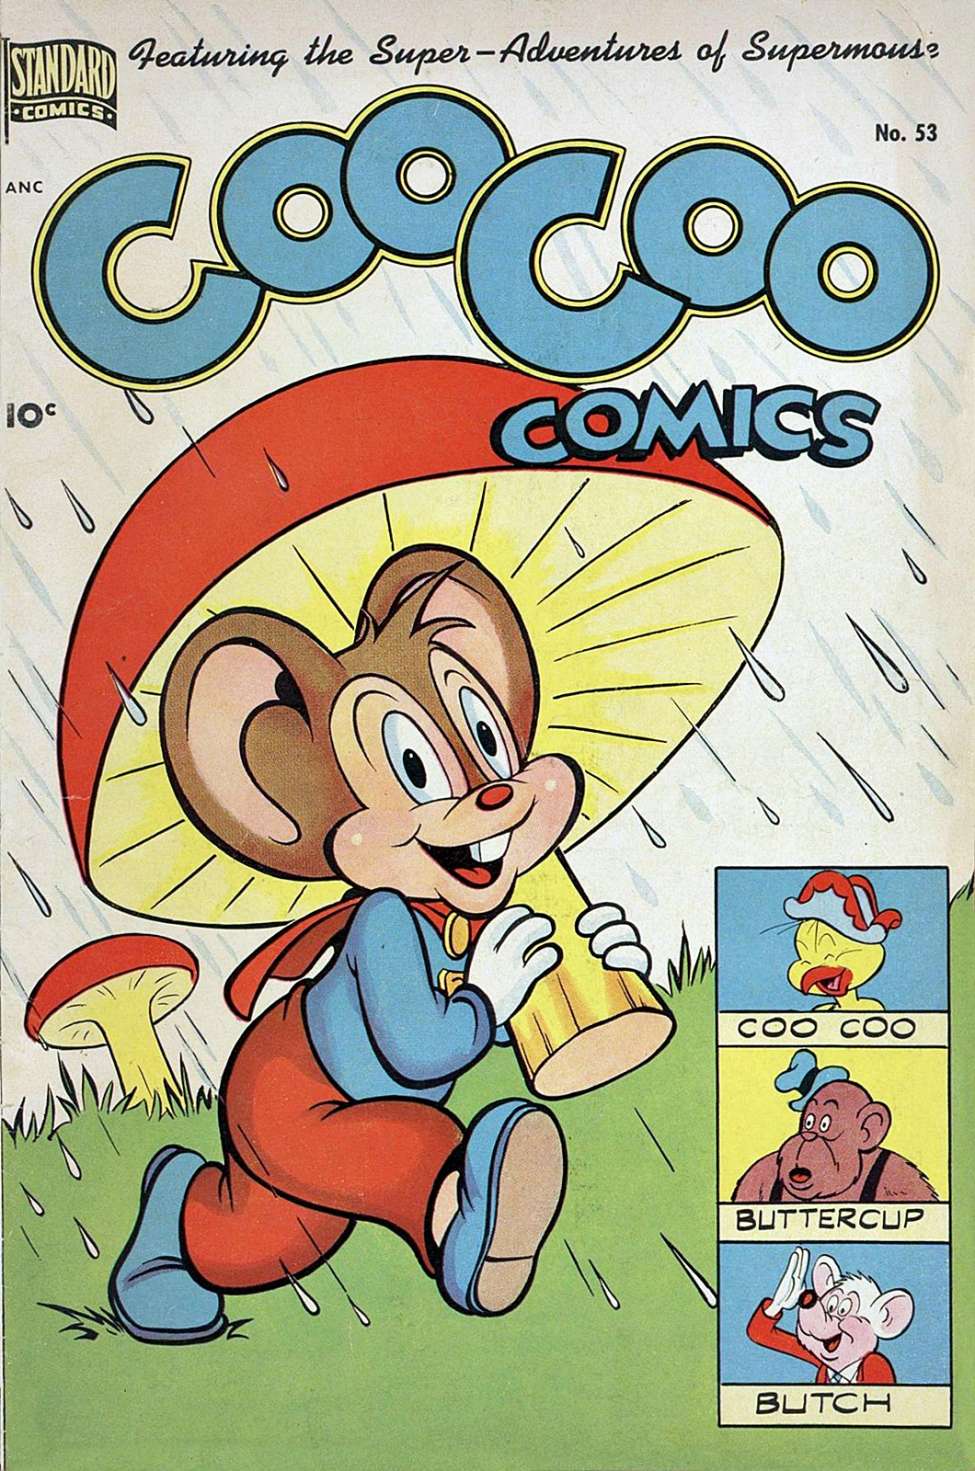 Book Cover For Coo Coo Comics 53 - Version 1